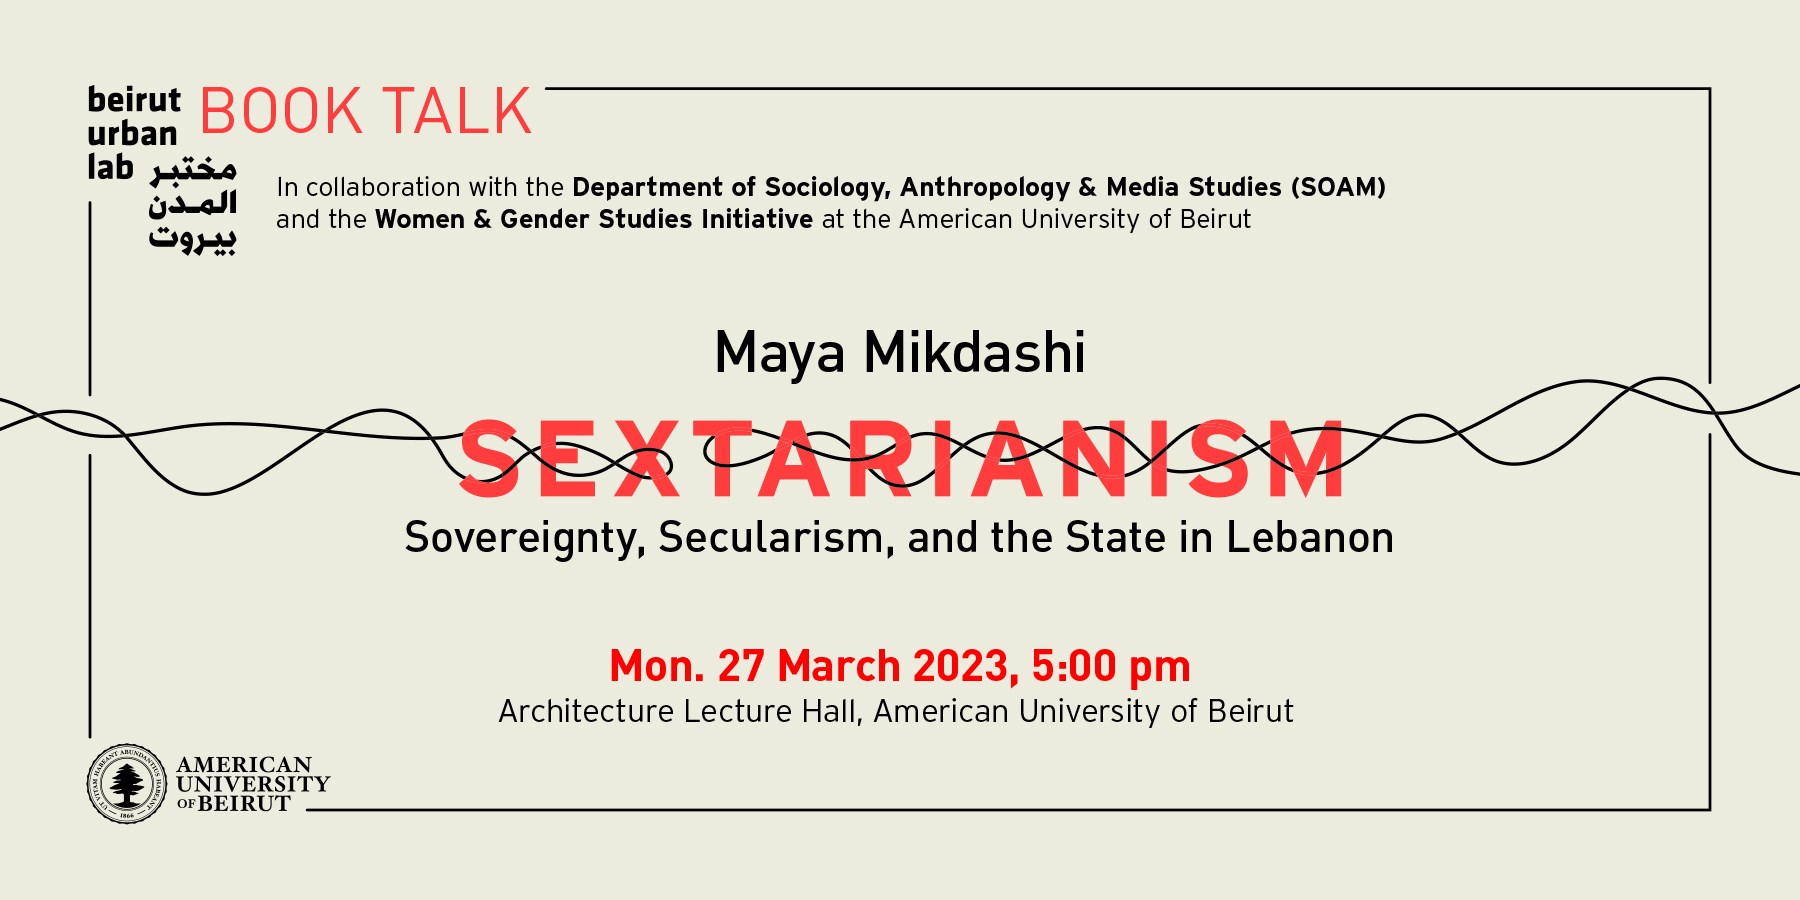 Sextarianism: Sovereignty, Secularism, and the State in Lebanon